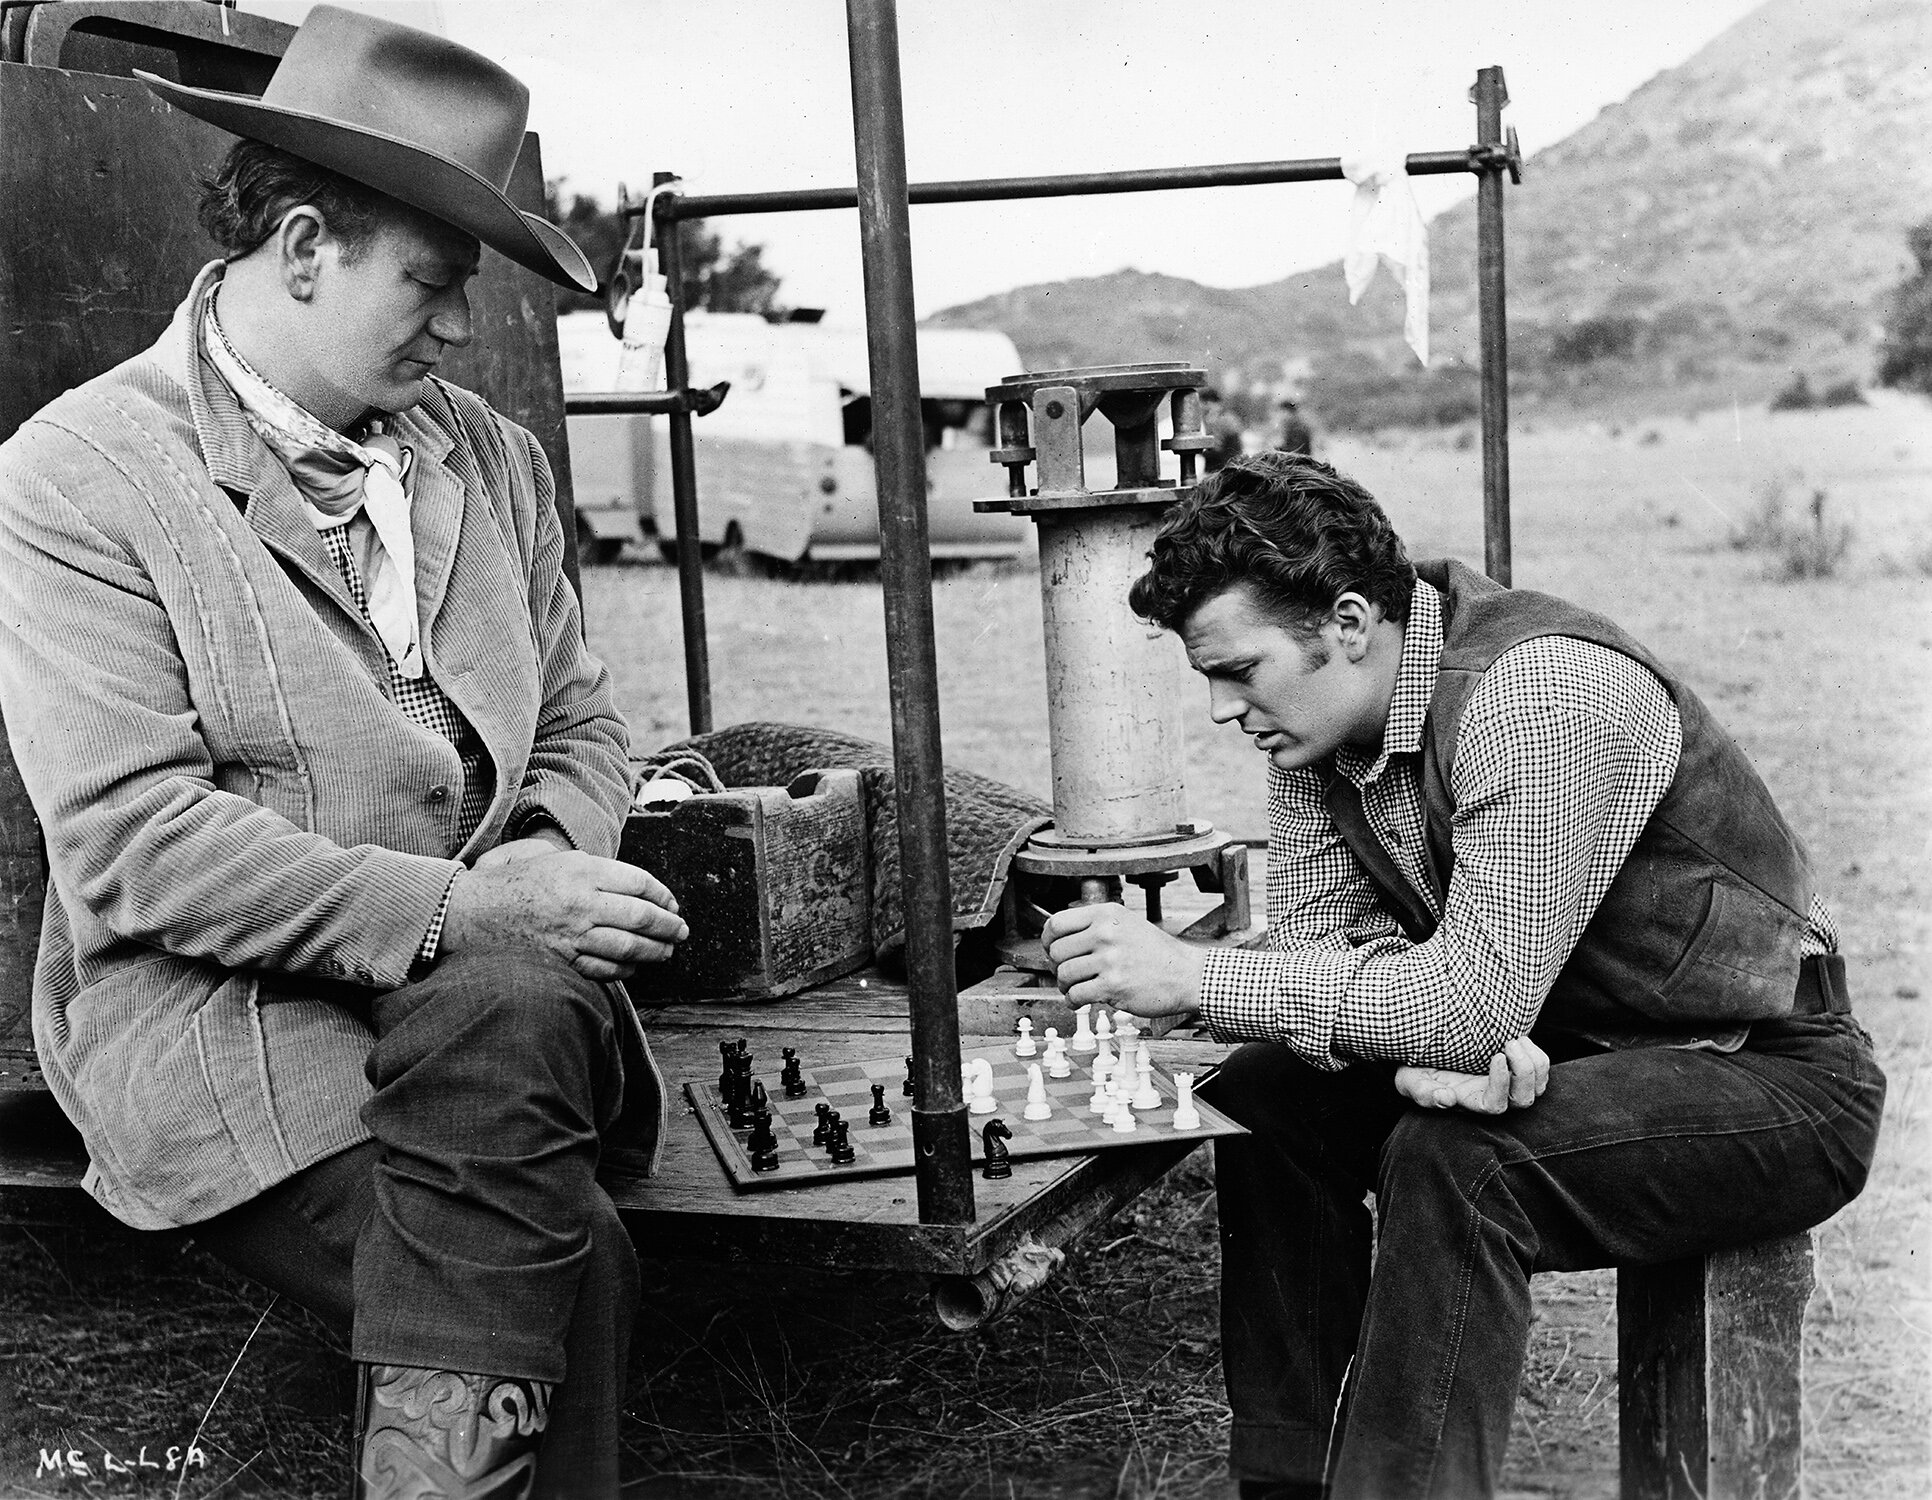 Known for playing a game or two during downtime, John Wayne and Patrick pick up a game of chess on set of McLintock!